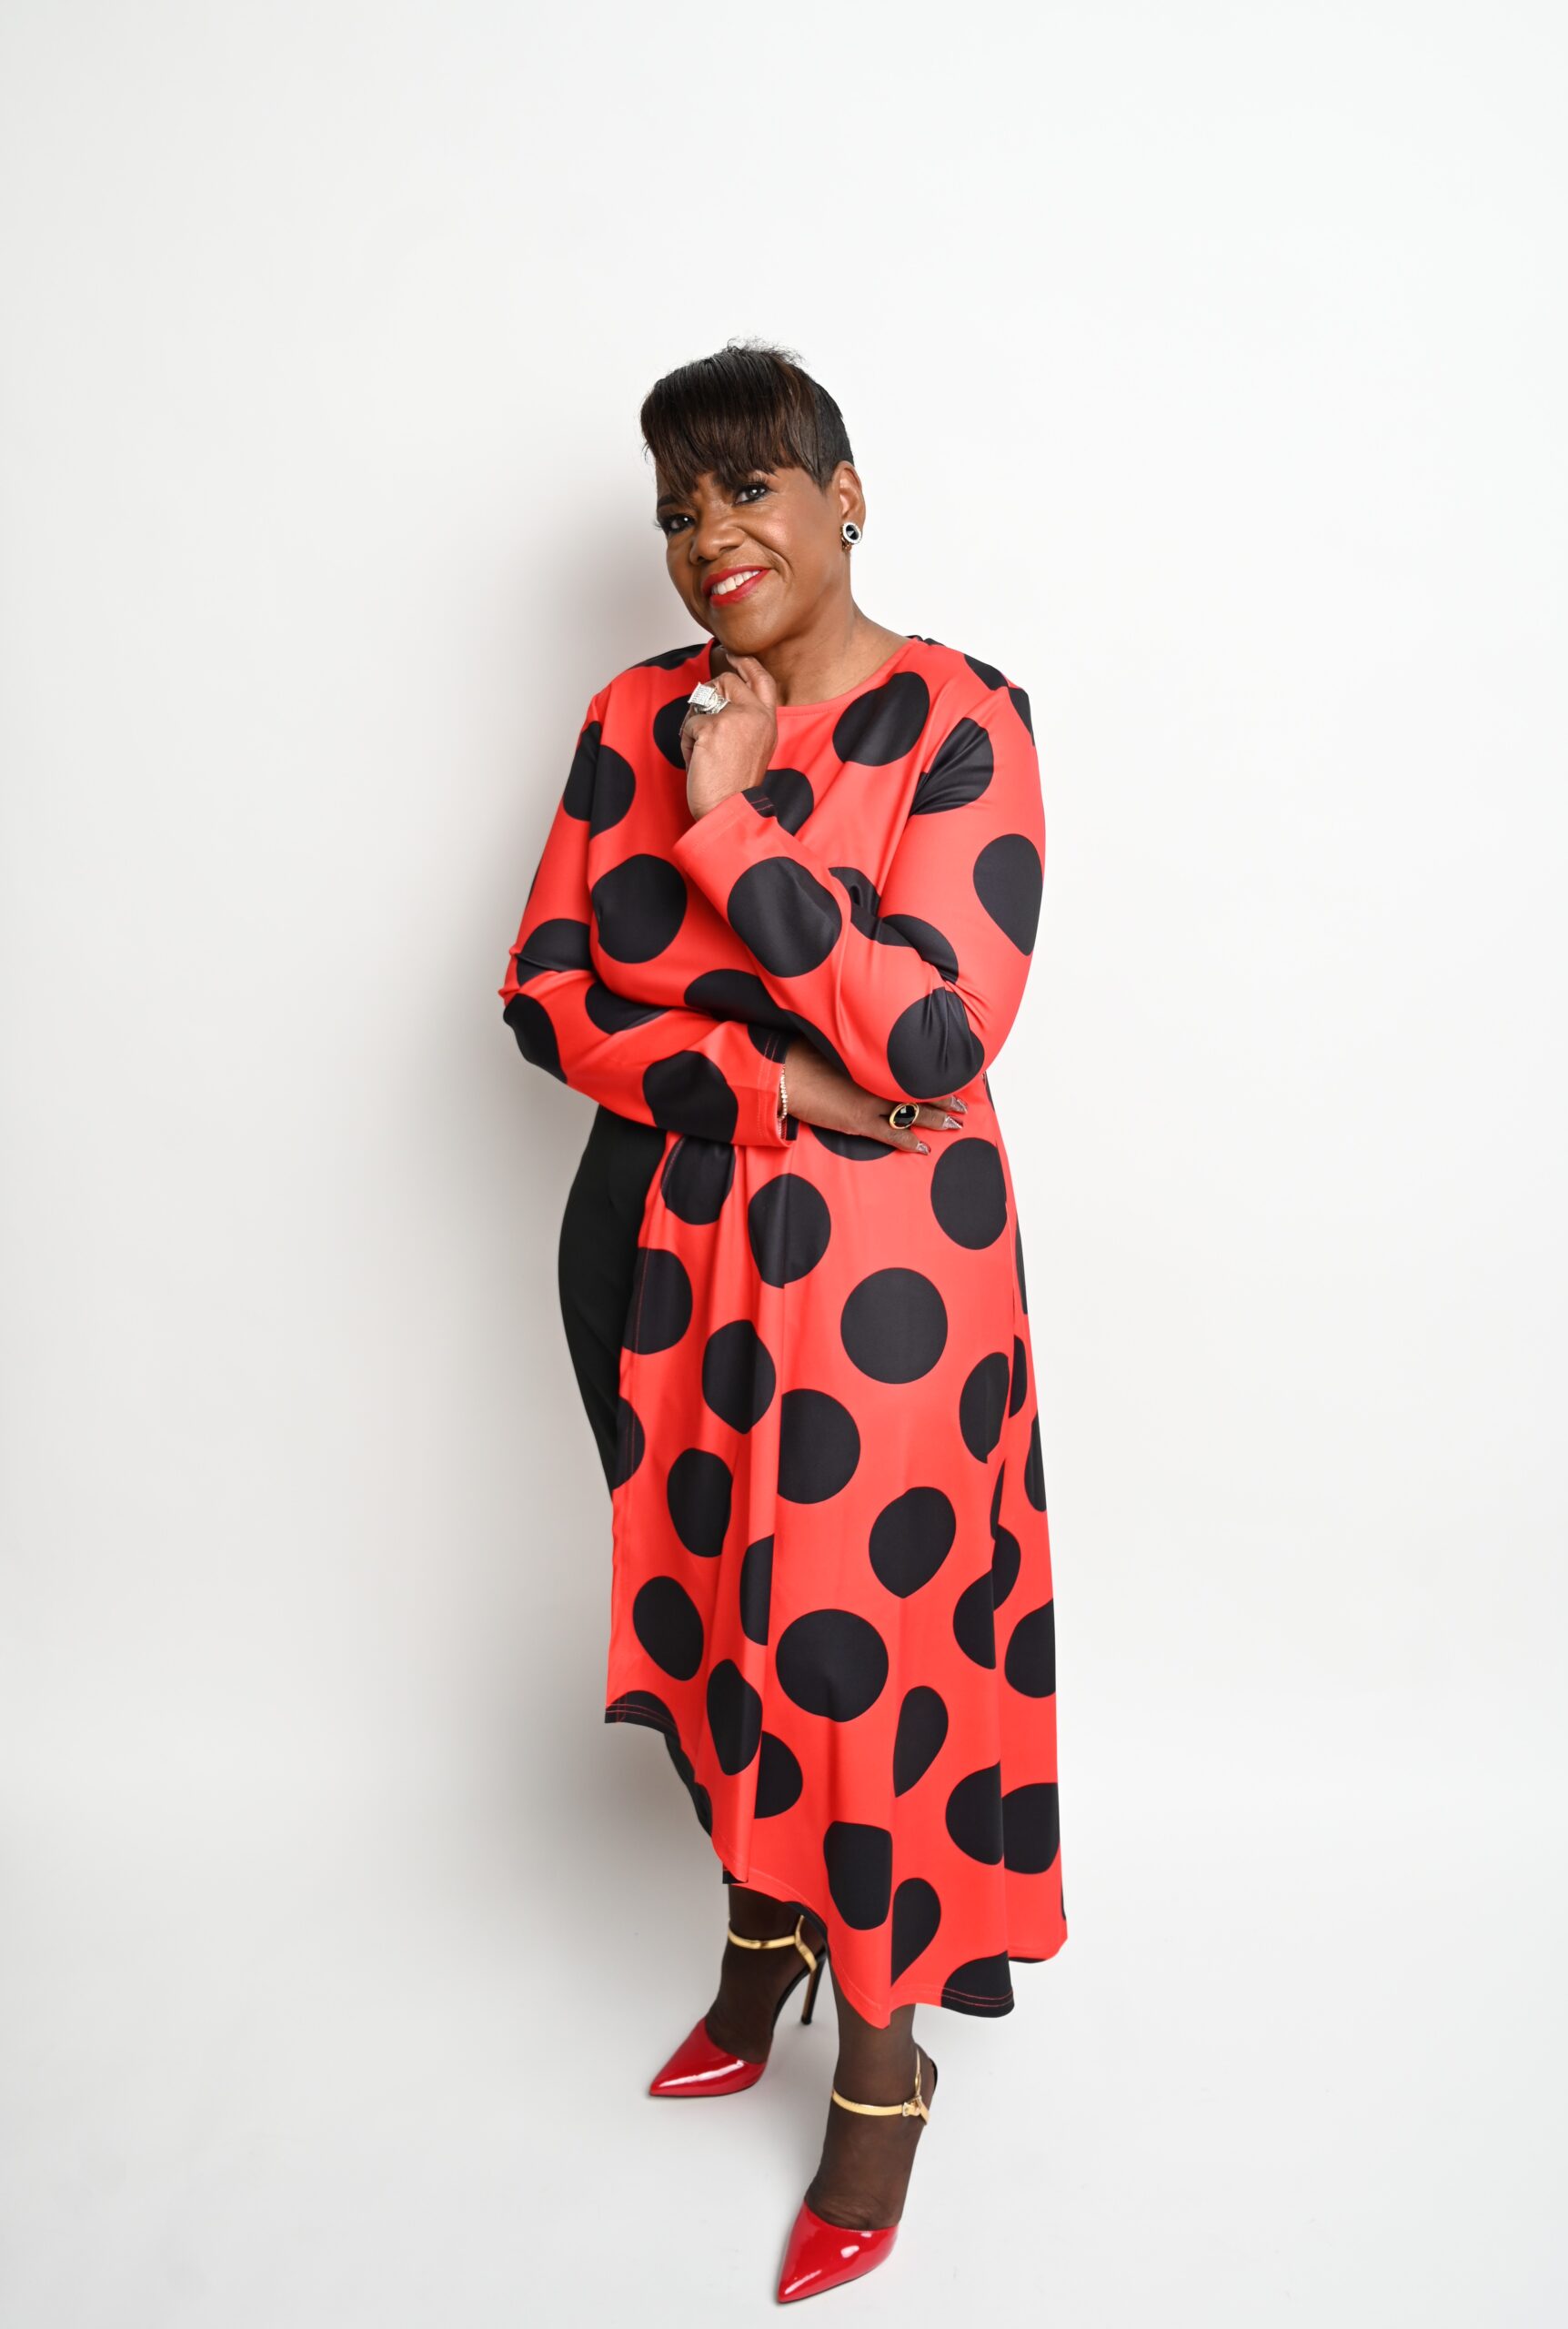 A photograph of Janet Tonkins in a long flowing red top with big black polka dots in front of a bright white background.